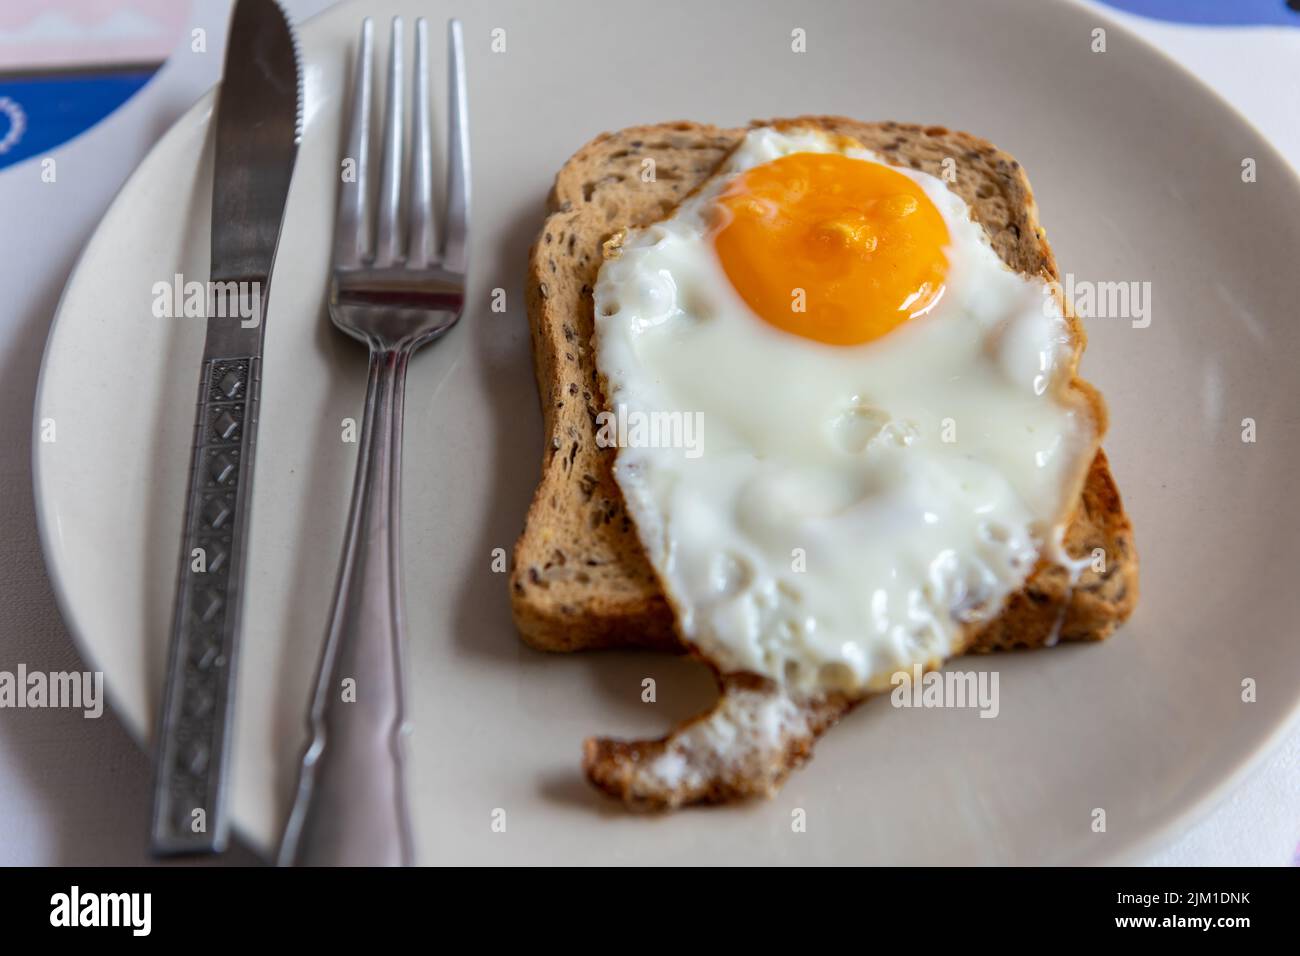 A fried egg on a slice of toasted bread on a plate with knife and fork. Stock Photo